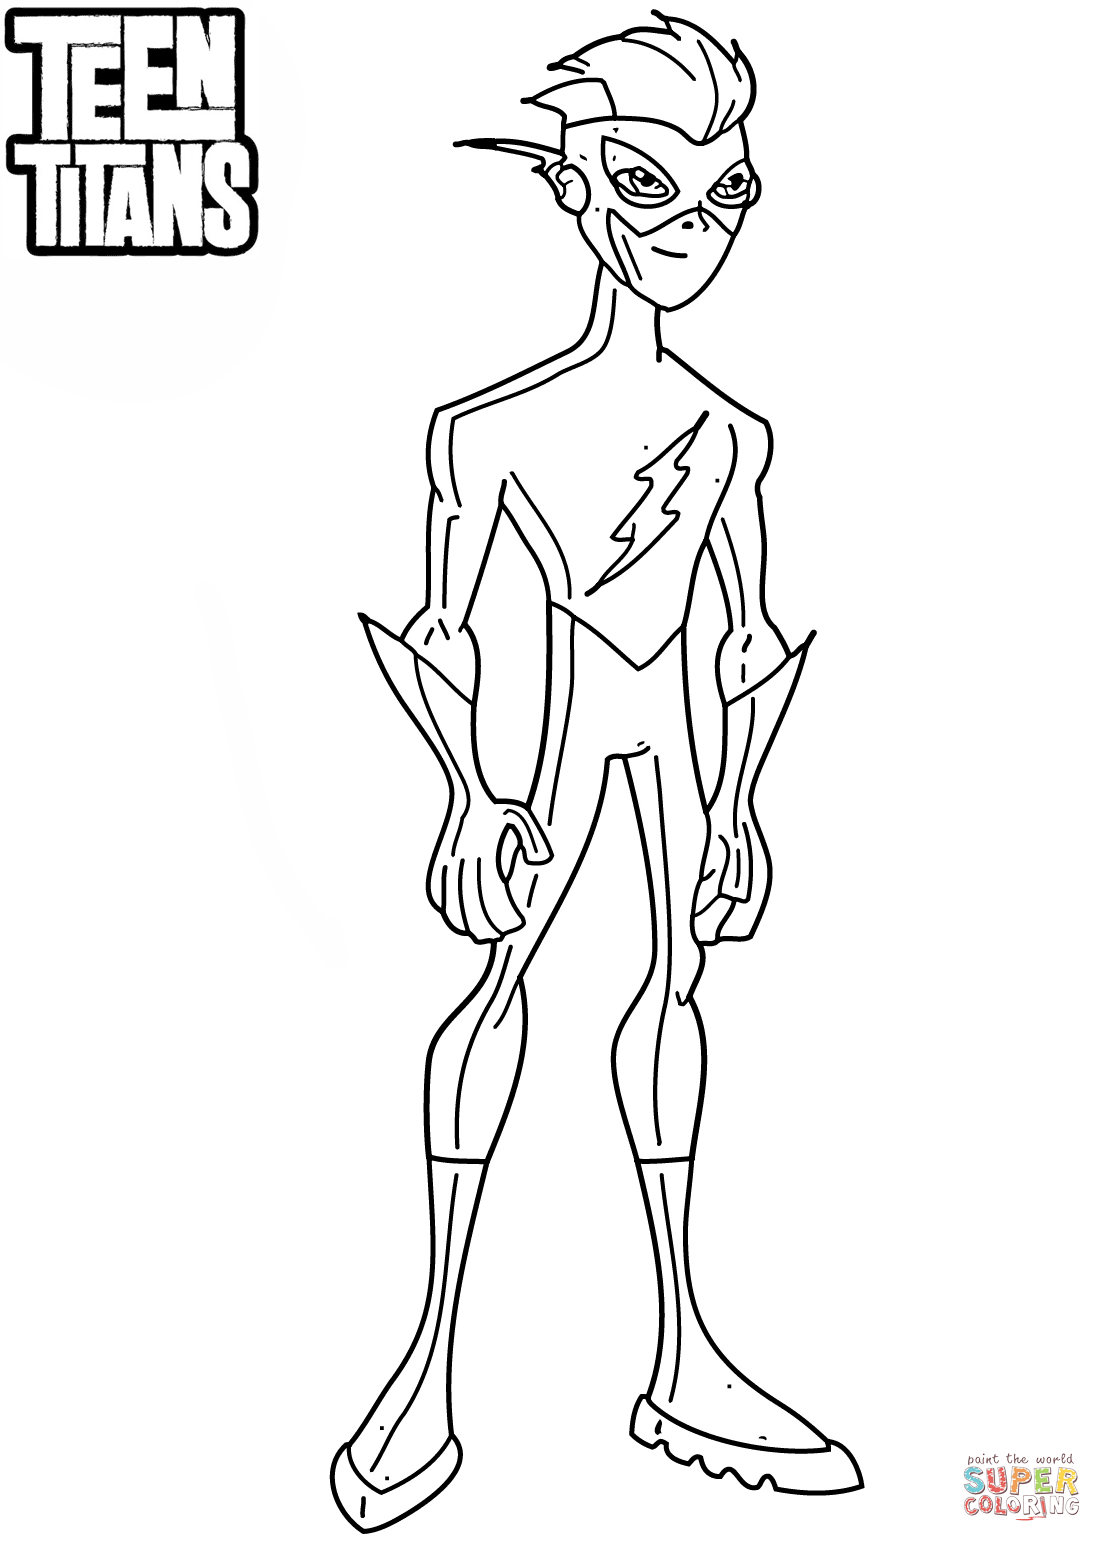 Teen titans kid flash coloring page free printable coloring pages